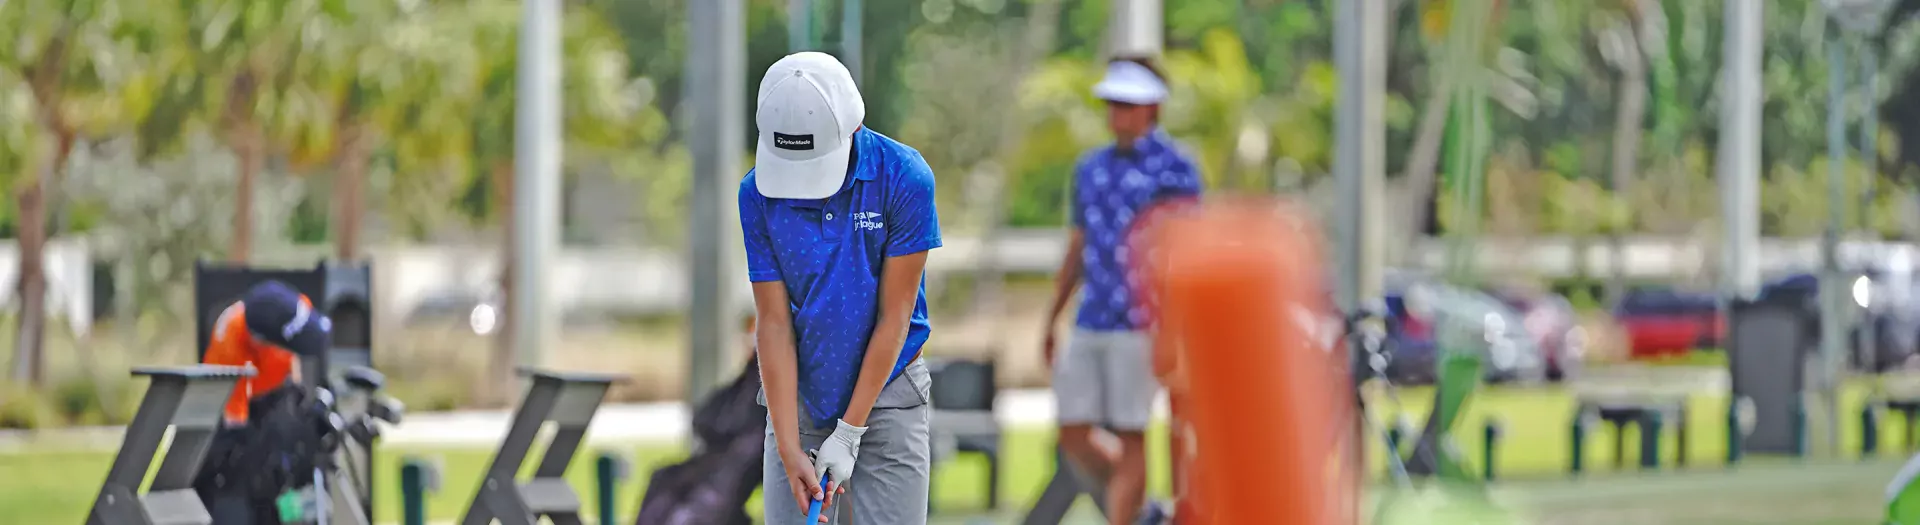 Image of a golfer on the driving range at Sailfish Sands Golf Course